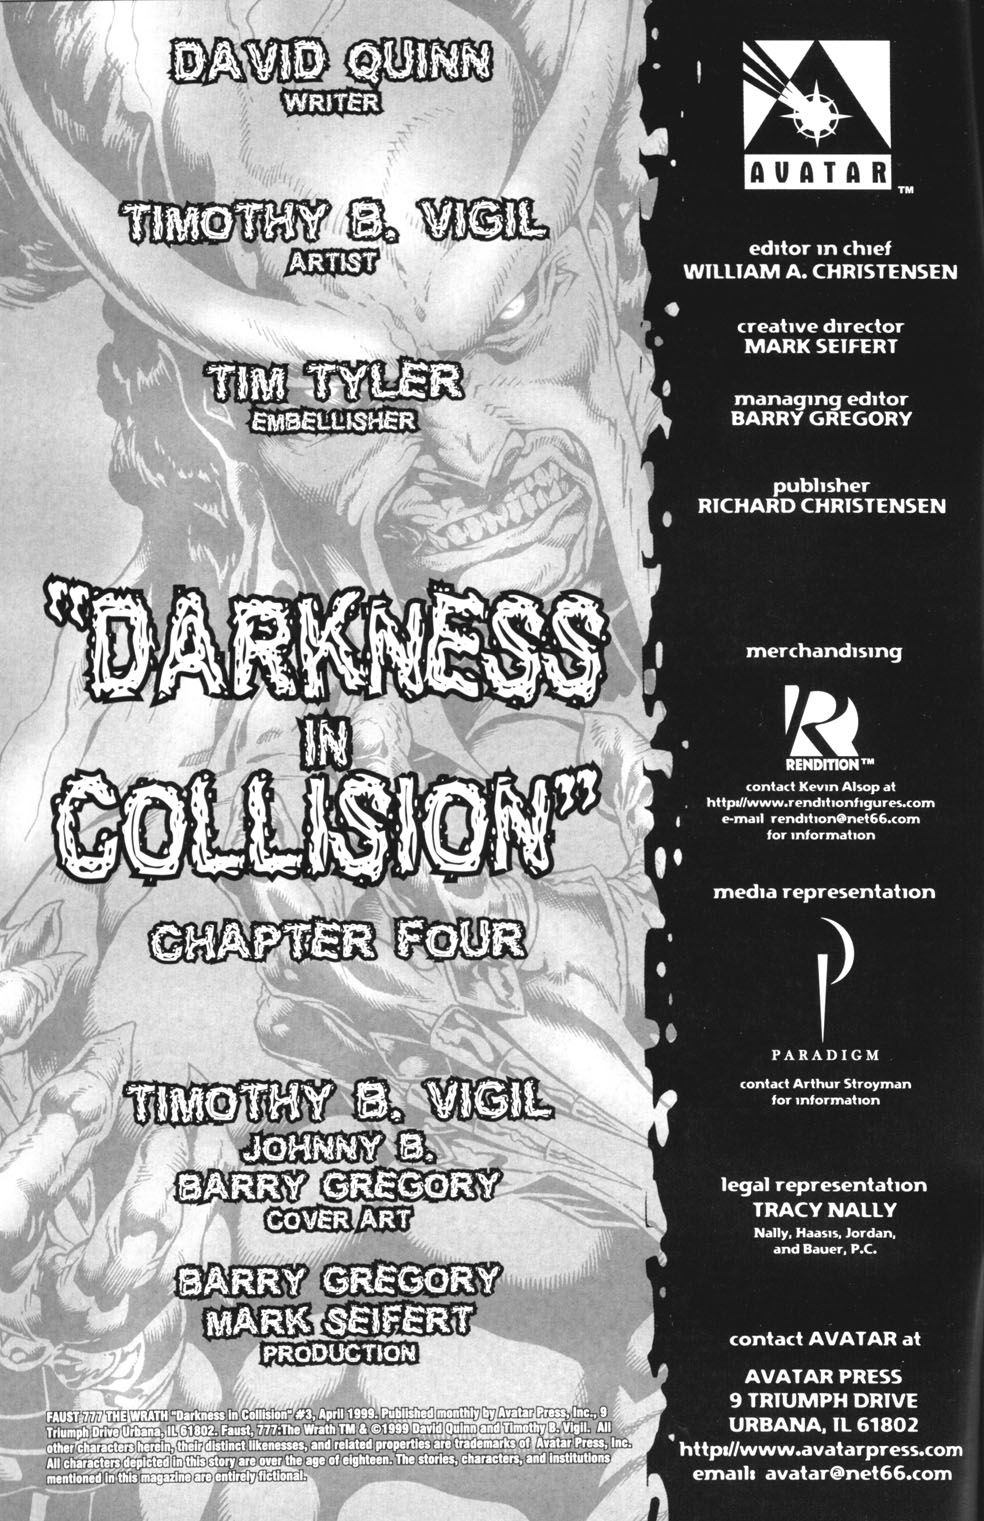 Faust 777 The Wrath-Darkness In Collision 03 3